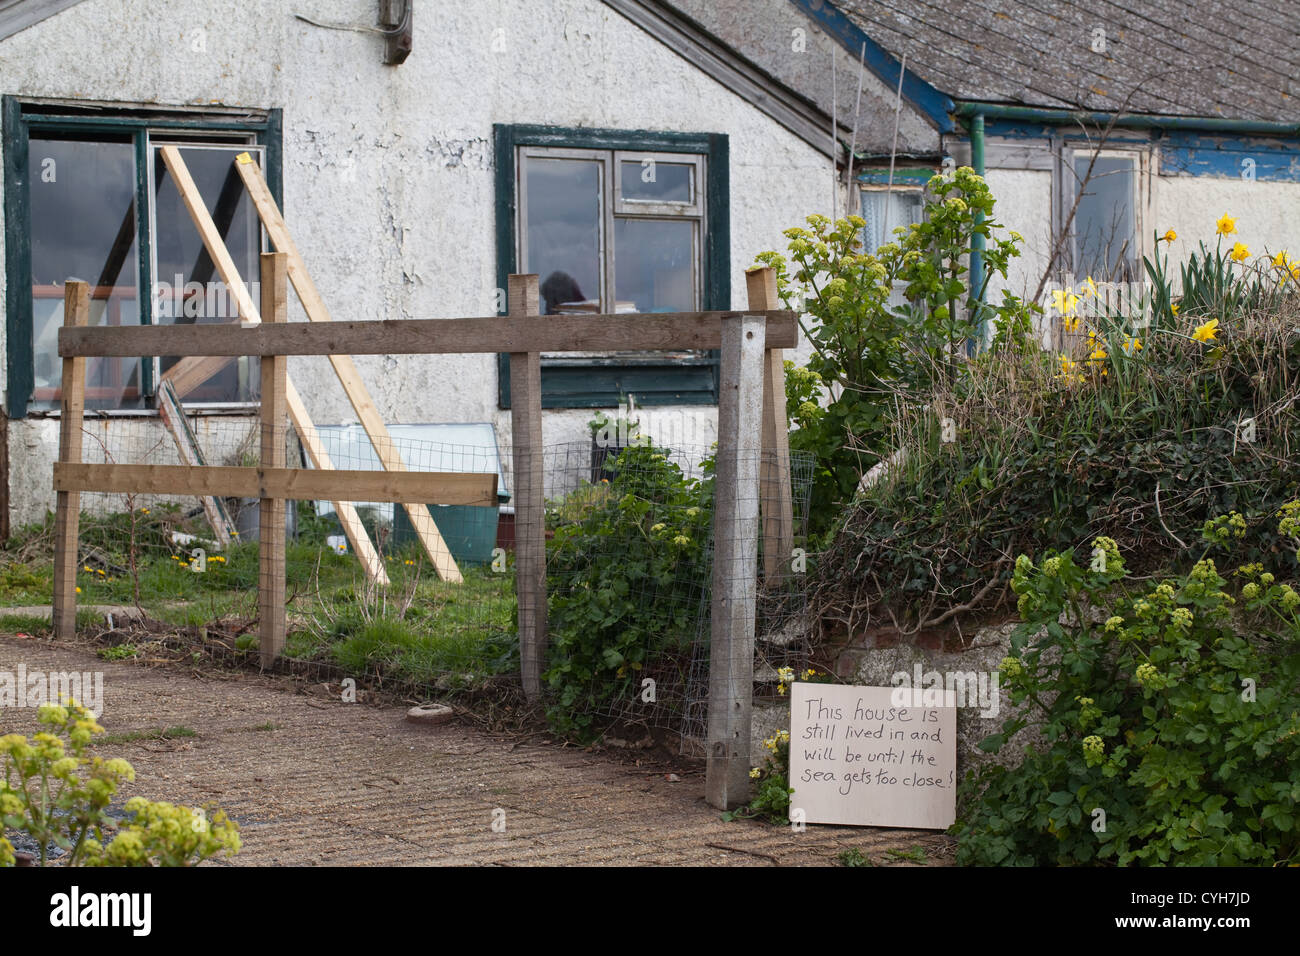 Happisburgh. Beach Road. Home not yet vacated. Resigned resident's hand written sign by gate. Next residence to be demolished. Stock Photo